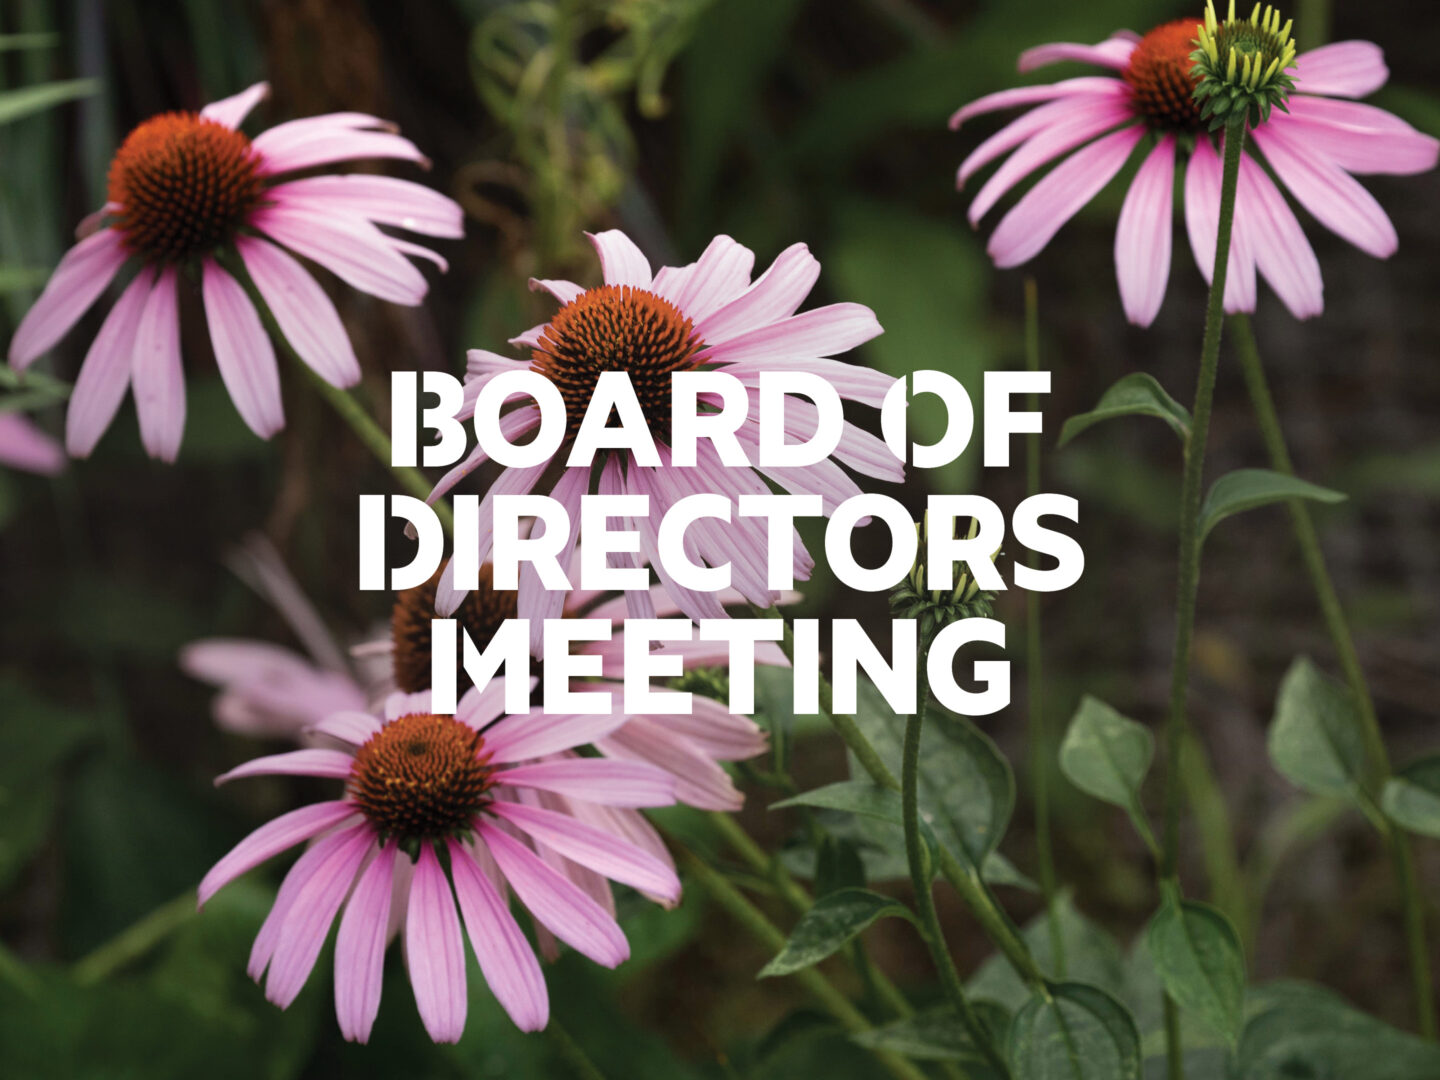 Text reading "Board of Directors Meeting" with a photo of flowers as a backdrop